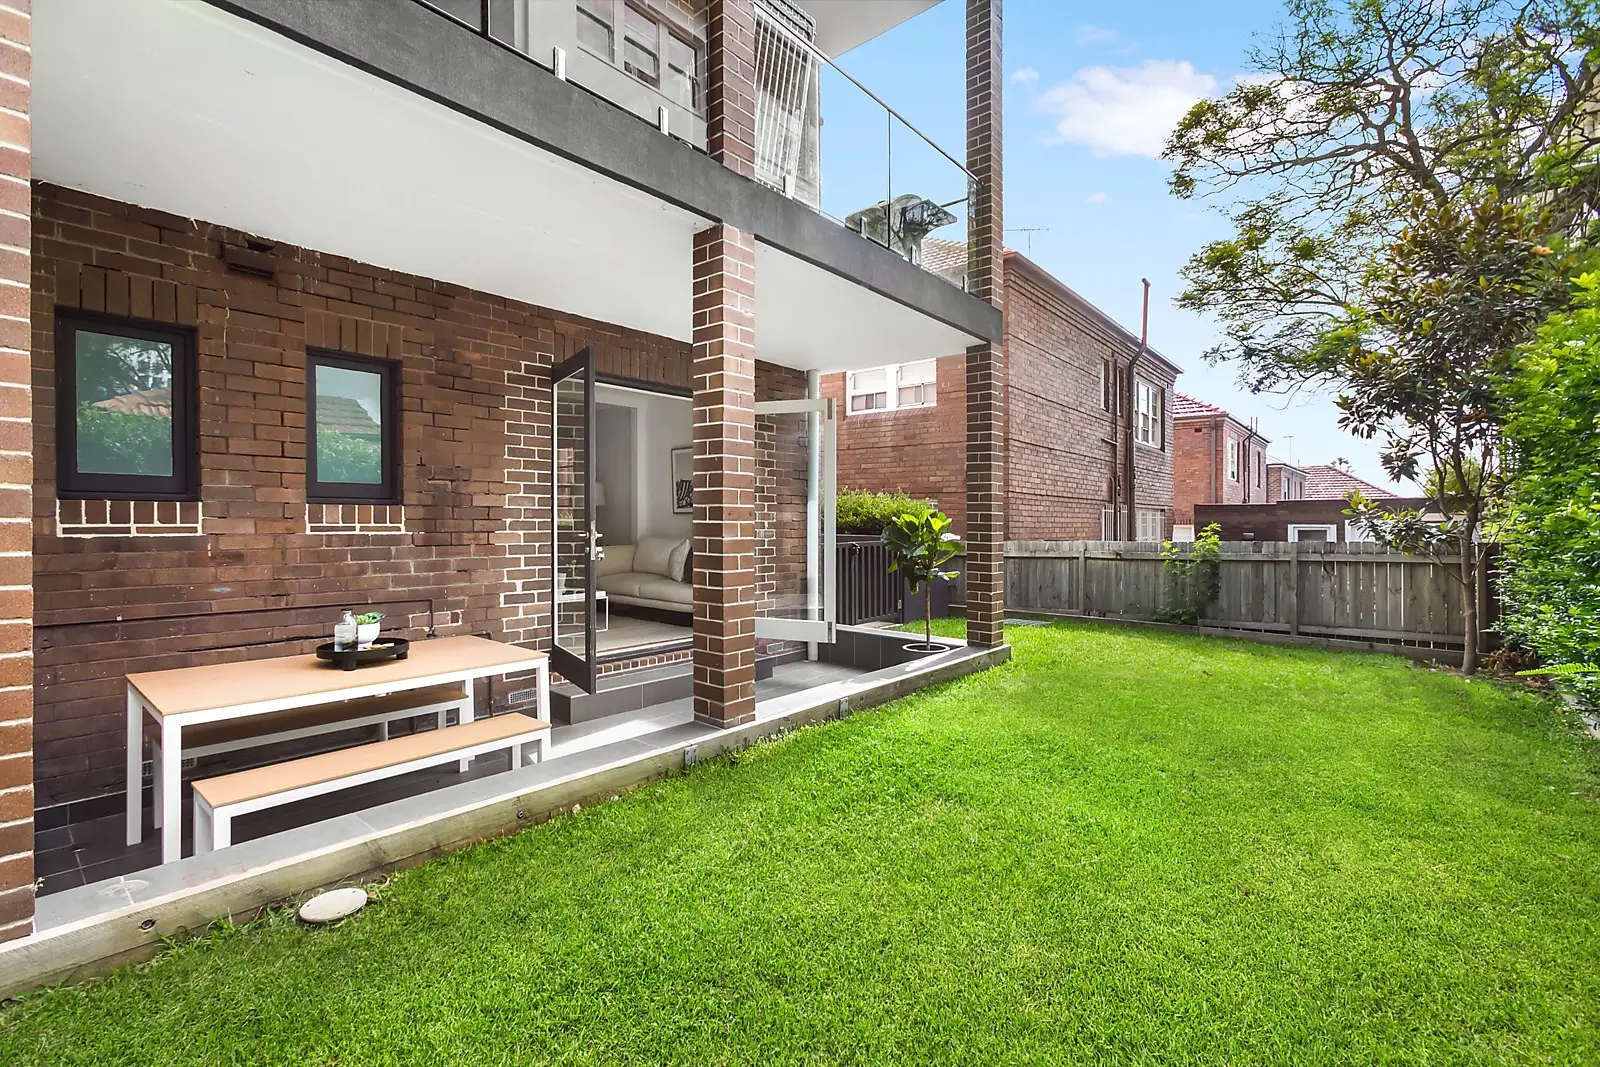 Photo #1: 1/9 Glenwood Avenue, Coogee - Sold by Sydney Sotheby's International Realty